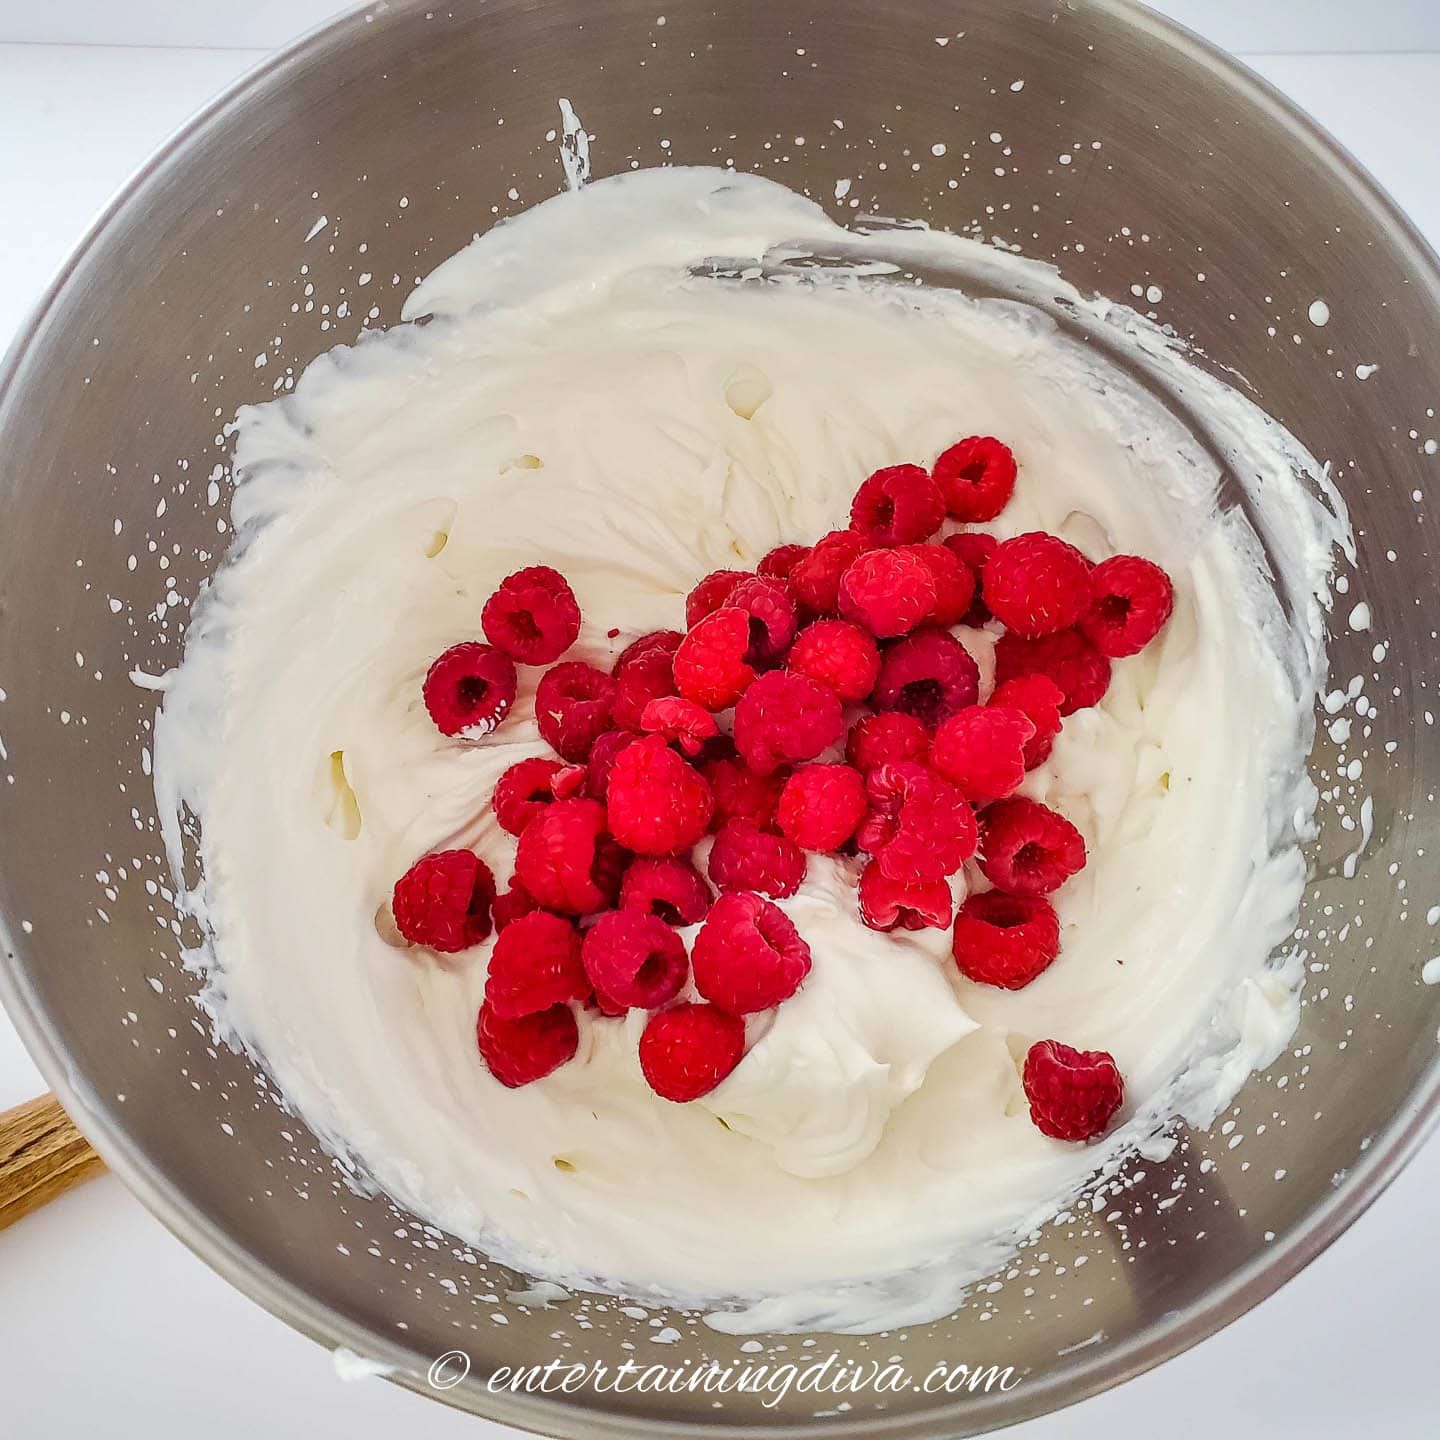 raspberries on top of whipped cream and sweetened condensed milk in a bowl